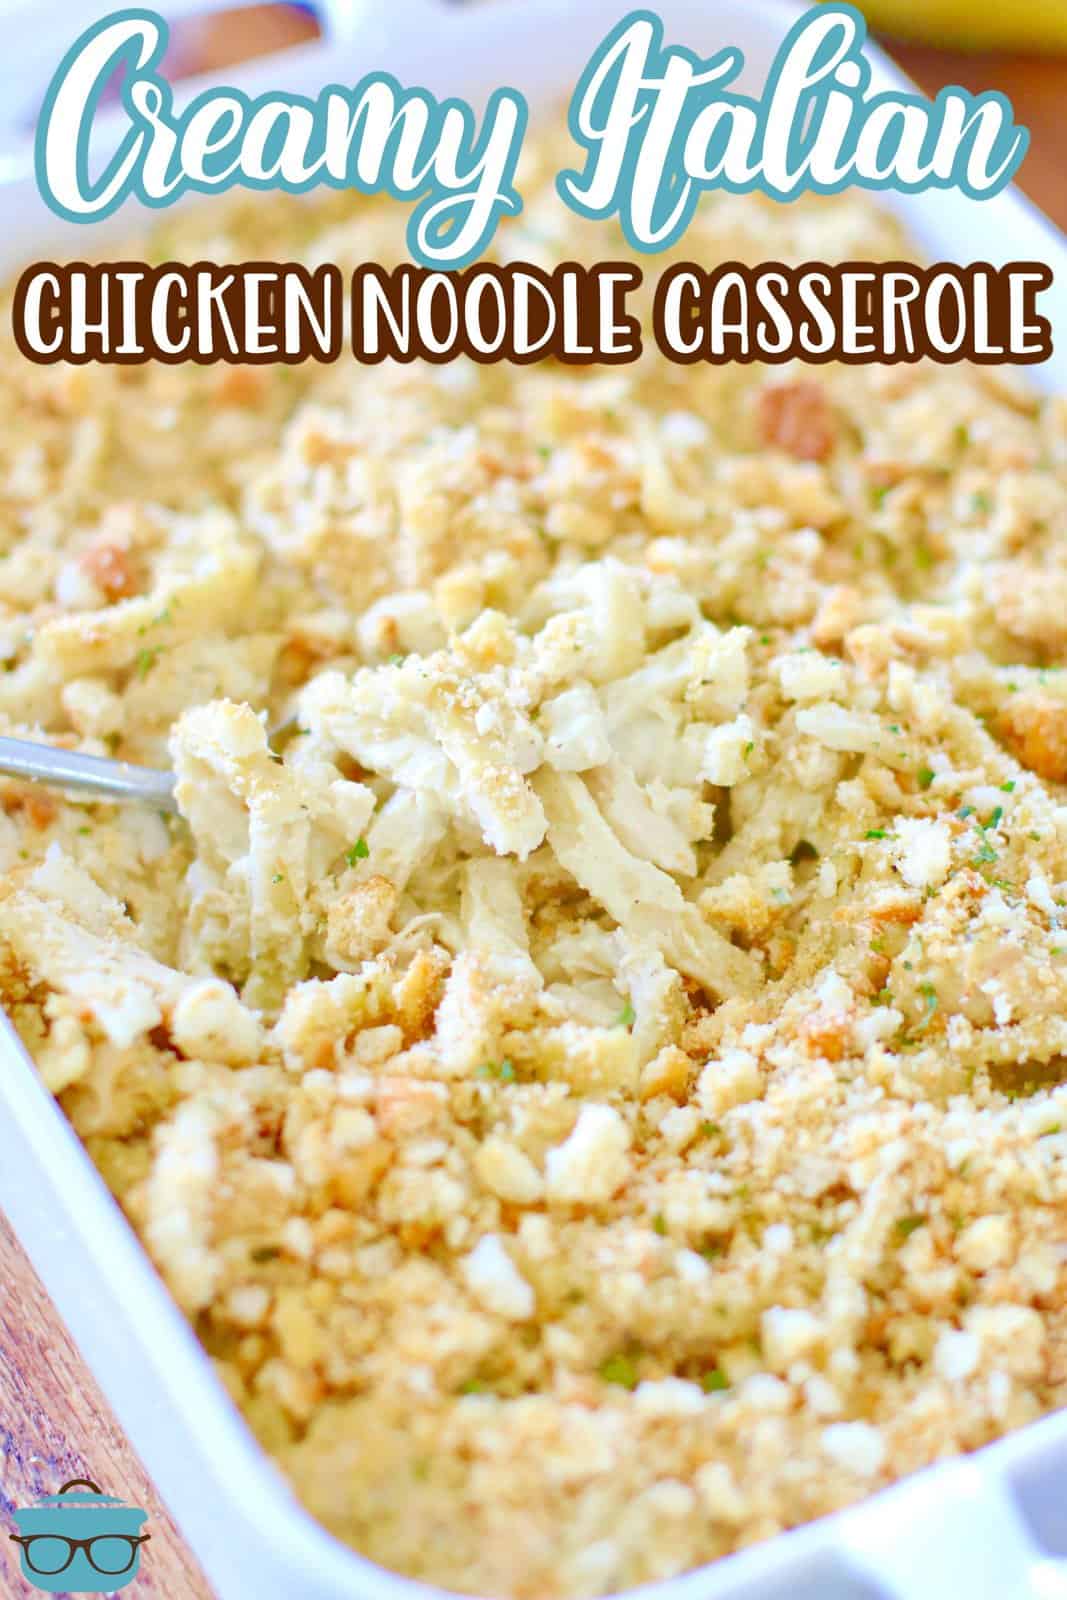 Italian chicken noodle casserole shown in a white baking dish with a spoon inserted.